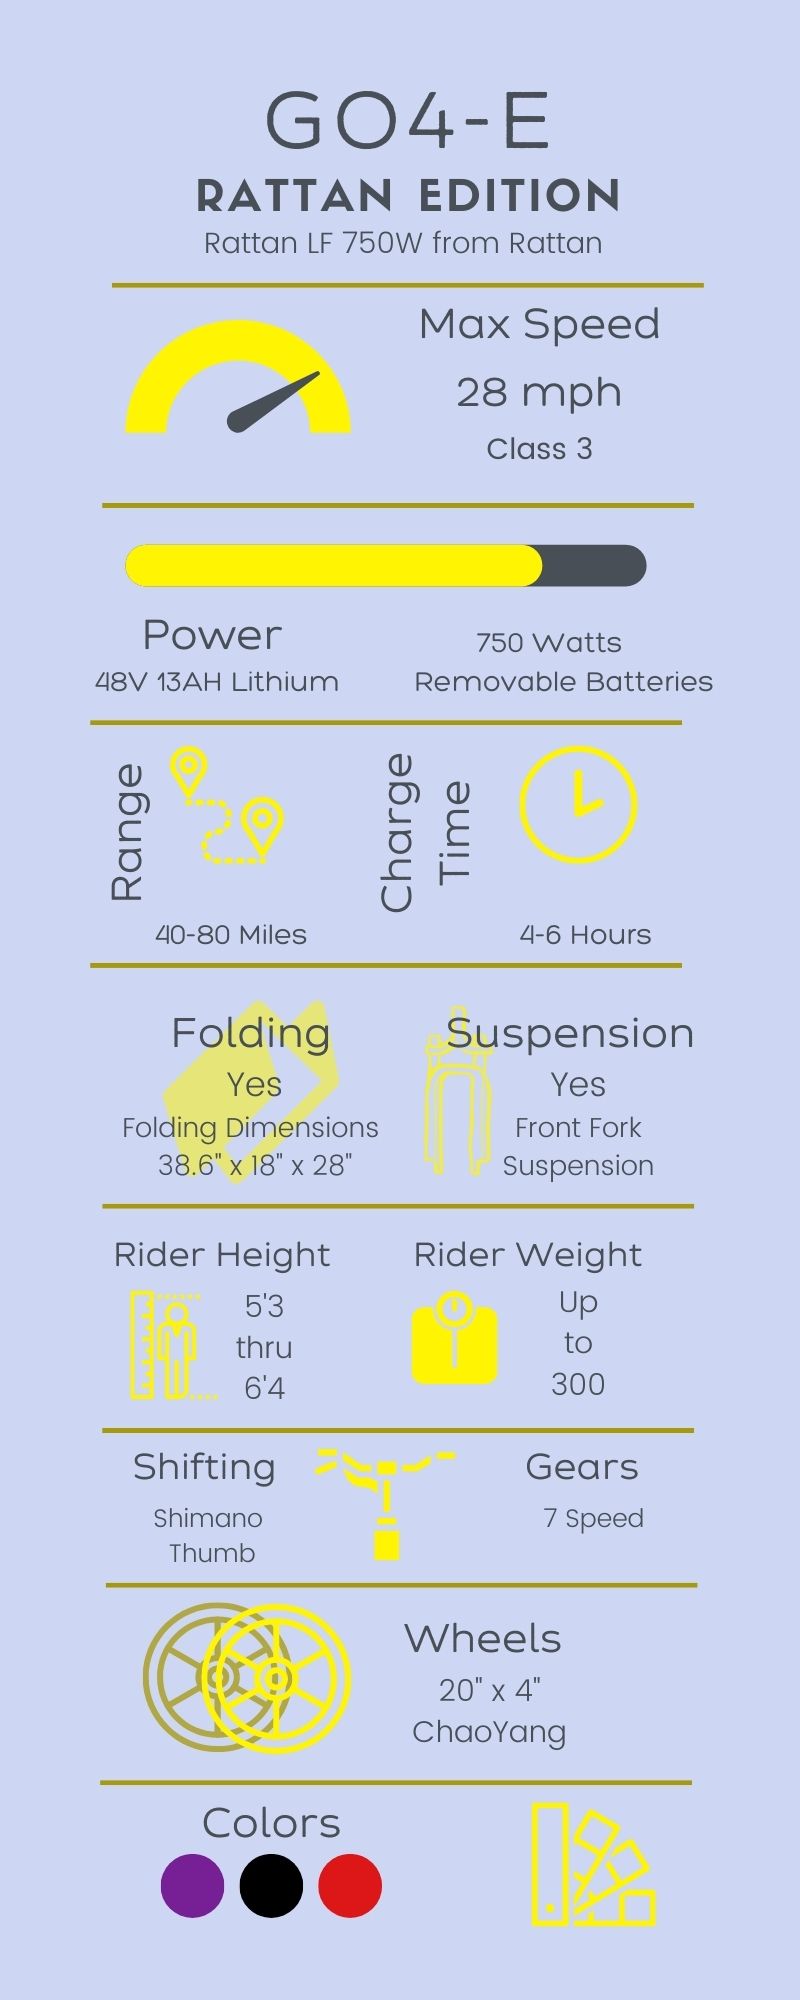 Infographic about the Rattan LF 750W eBike from Rattan that is compatible with the Go4-E Connection Kit to create a Blackbird Bikes Sociable Tandem side-by-side quadribike. This 4 wheel bicycle offers a stable ride inclusive for all abilities and adaptive to special needs riders.